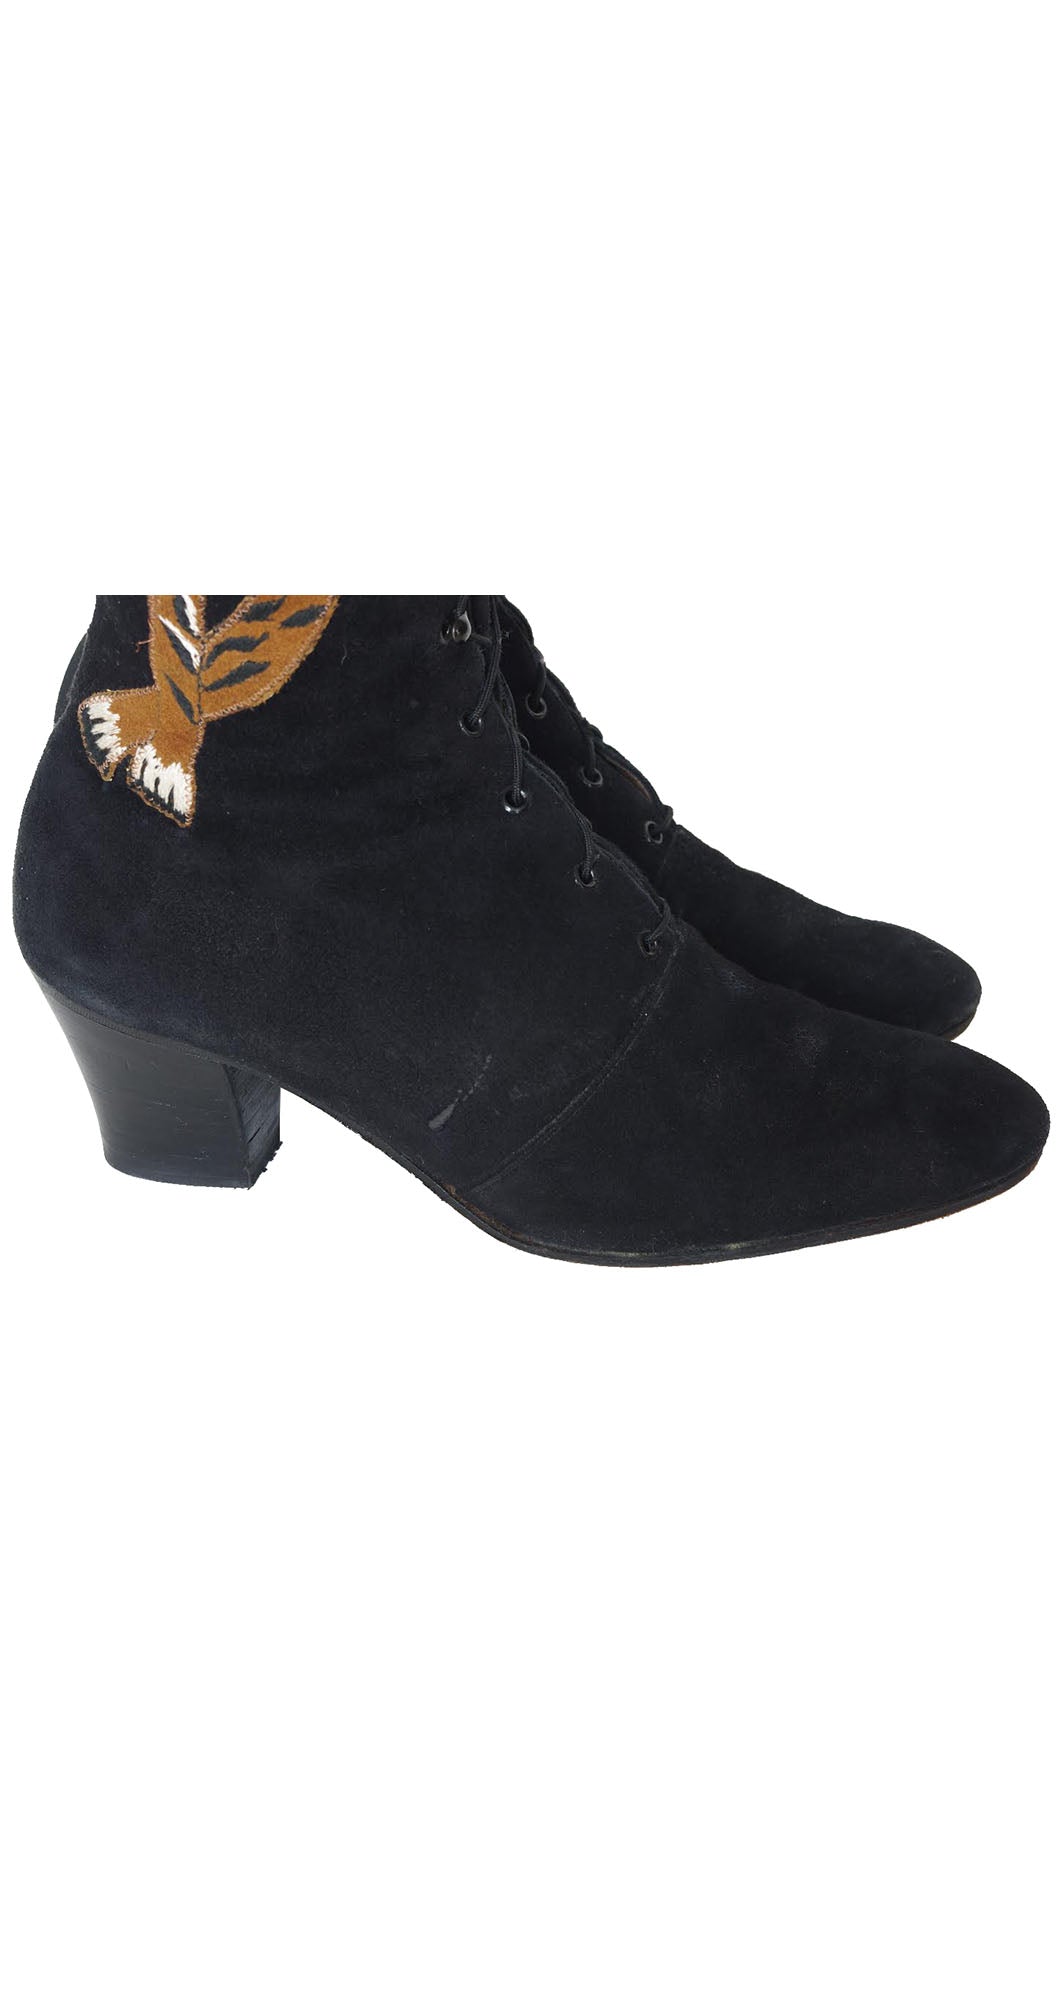 c. 1970 Embroidered Tiger Black Suede Lace-Up Boots